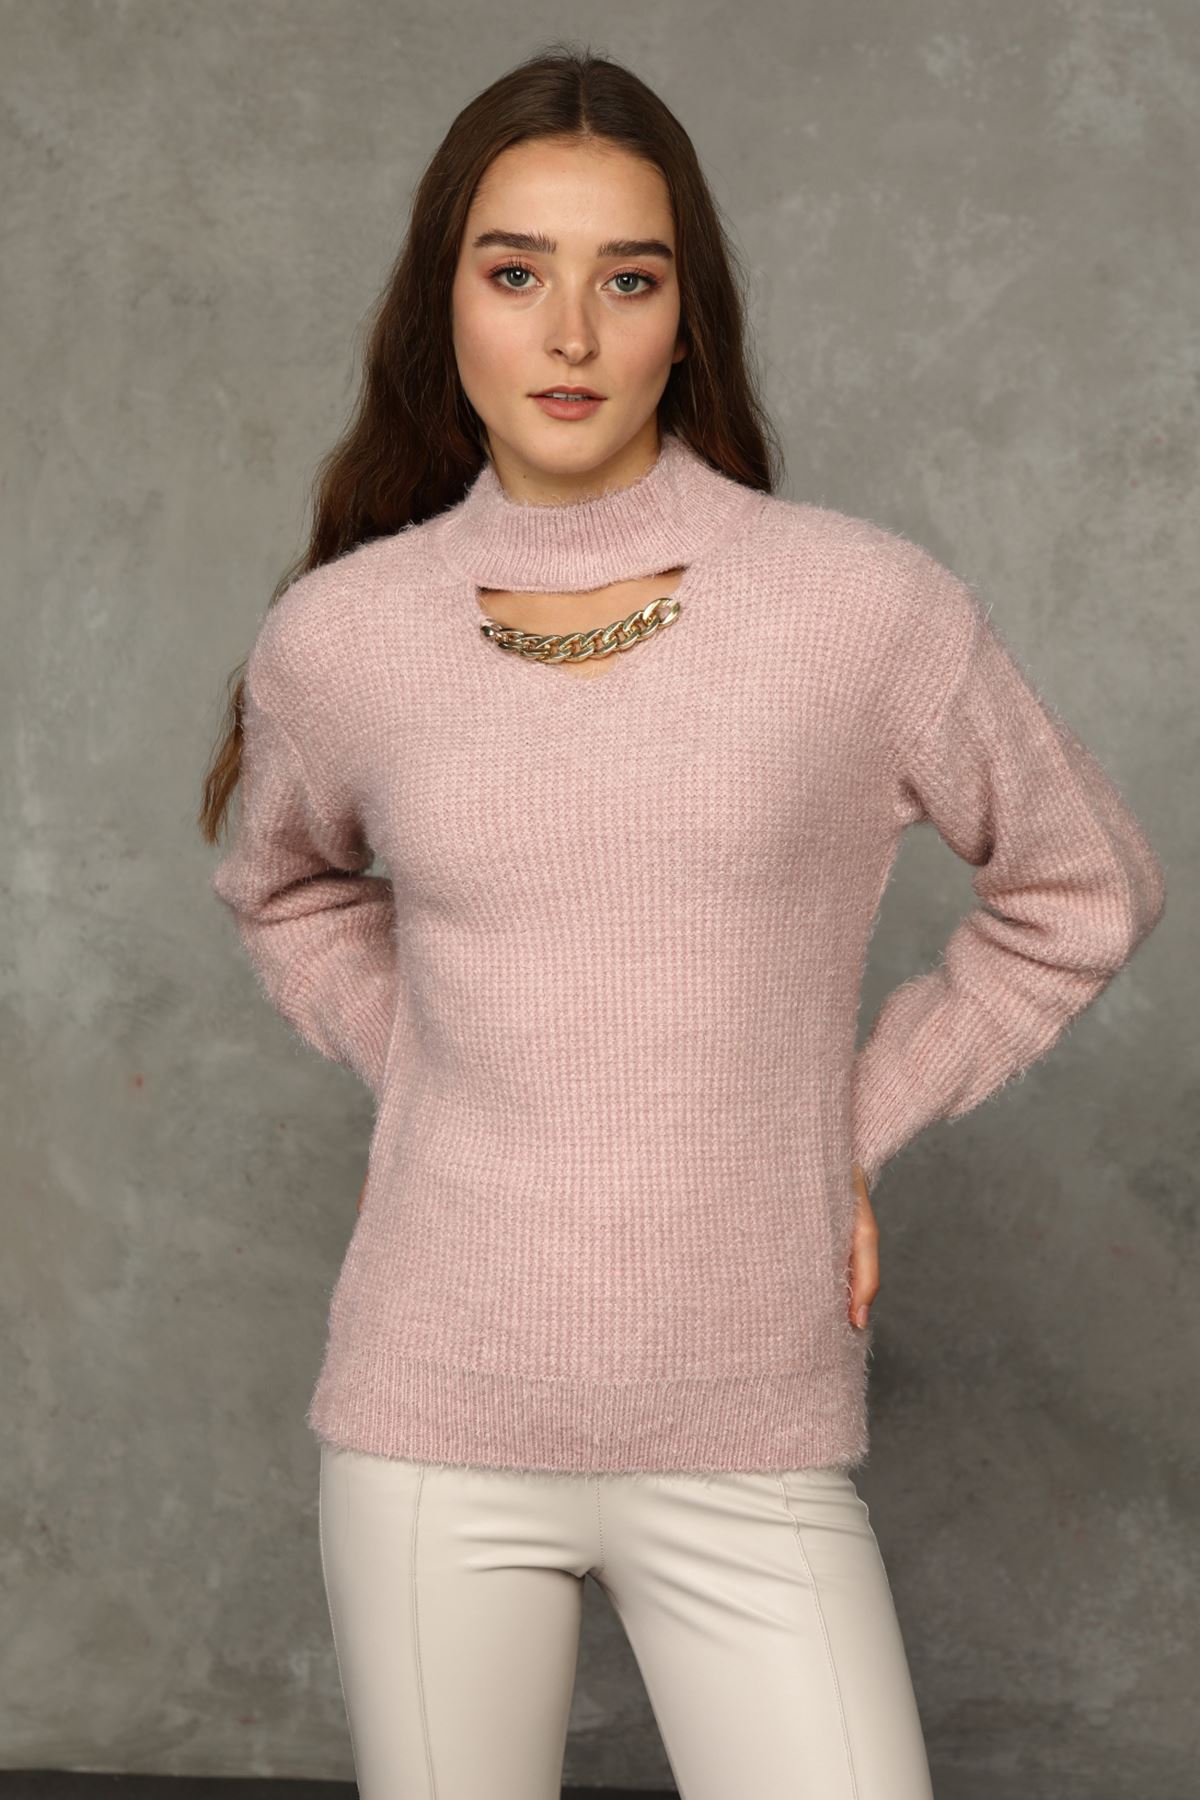 Women's Knit Sweater with Chain Detail at the Neck